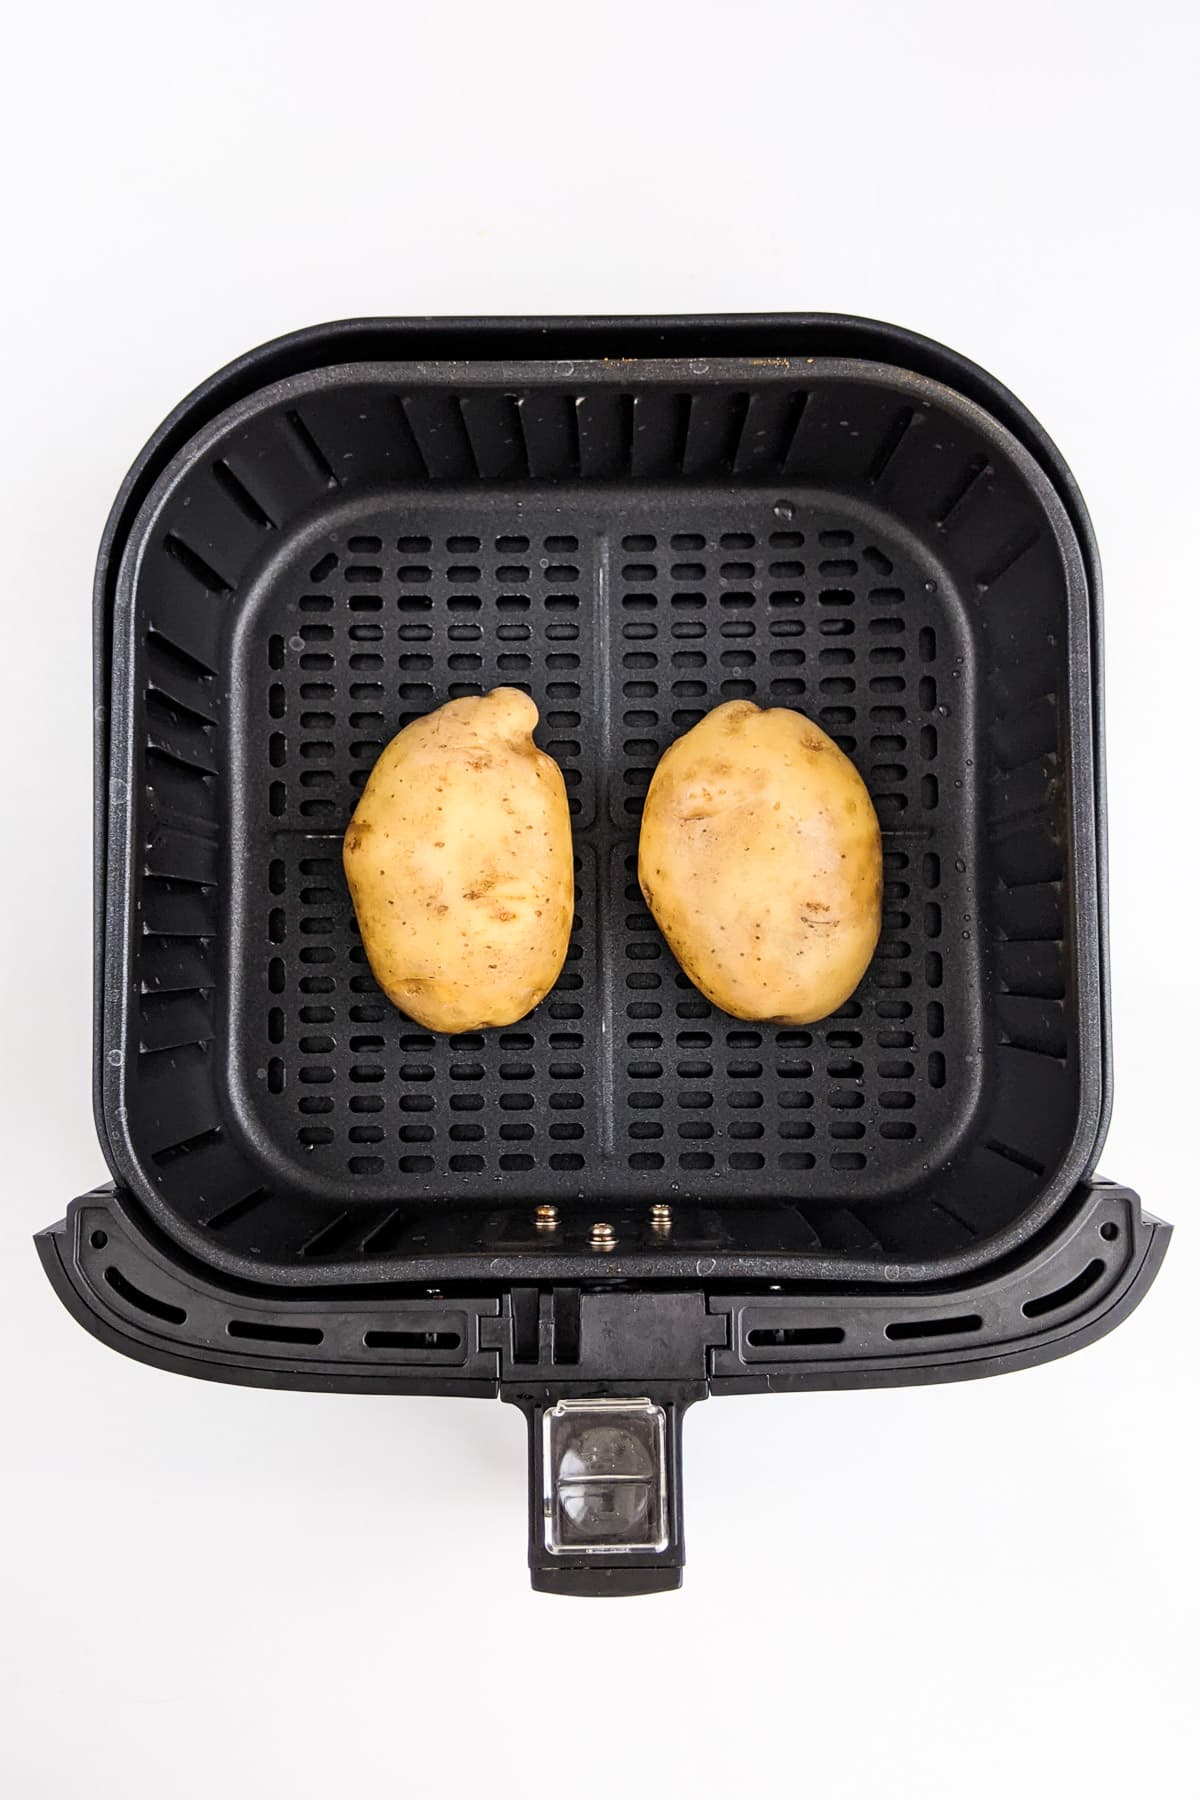 Top view of two potatoes in an air fryer basket.